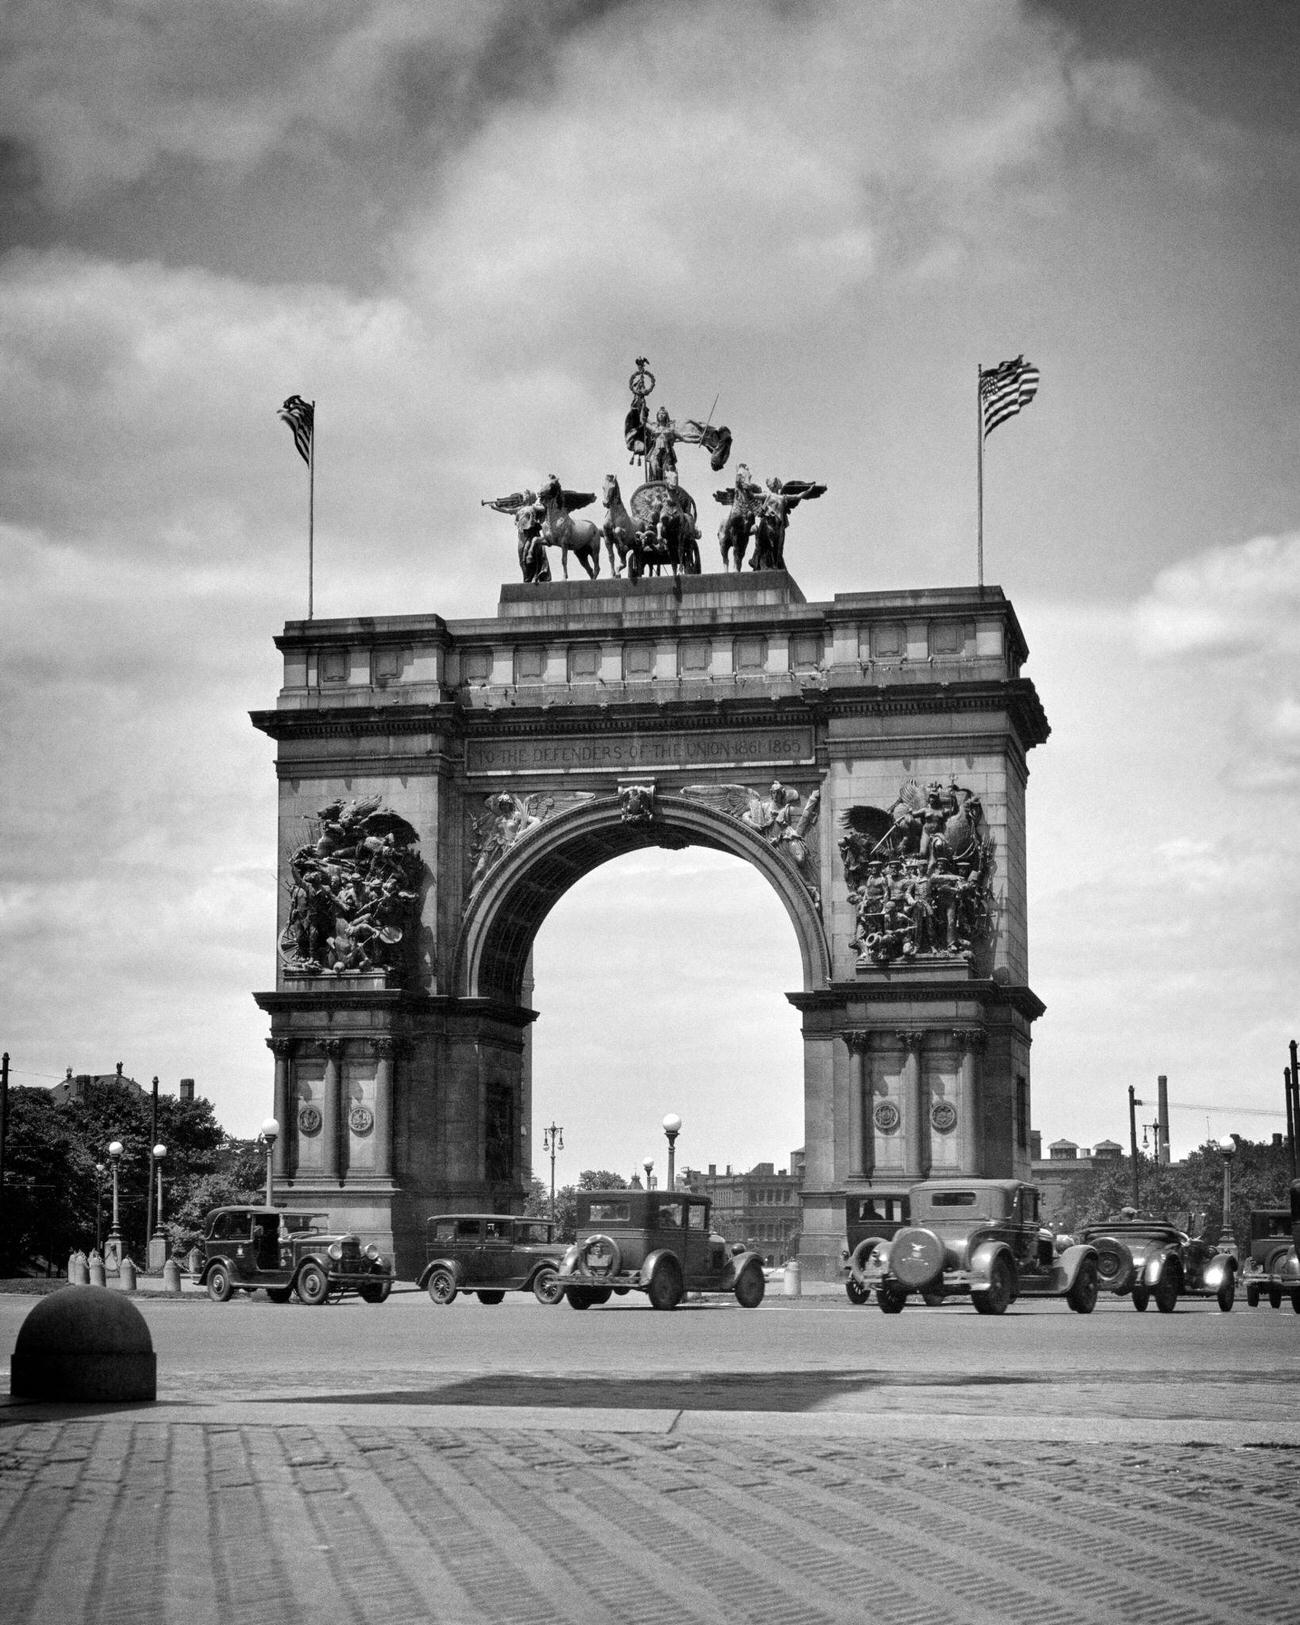 Sailors And Soldiers Arch In Grand Army Plaza, Brooklyn, 1920S.